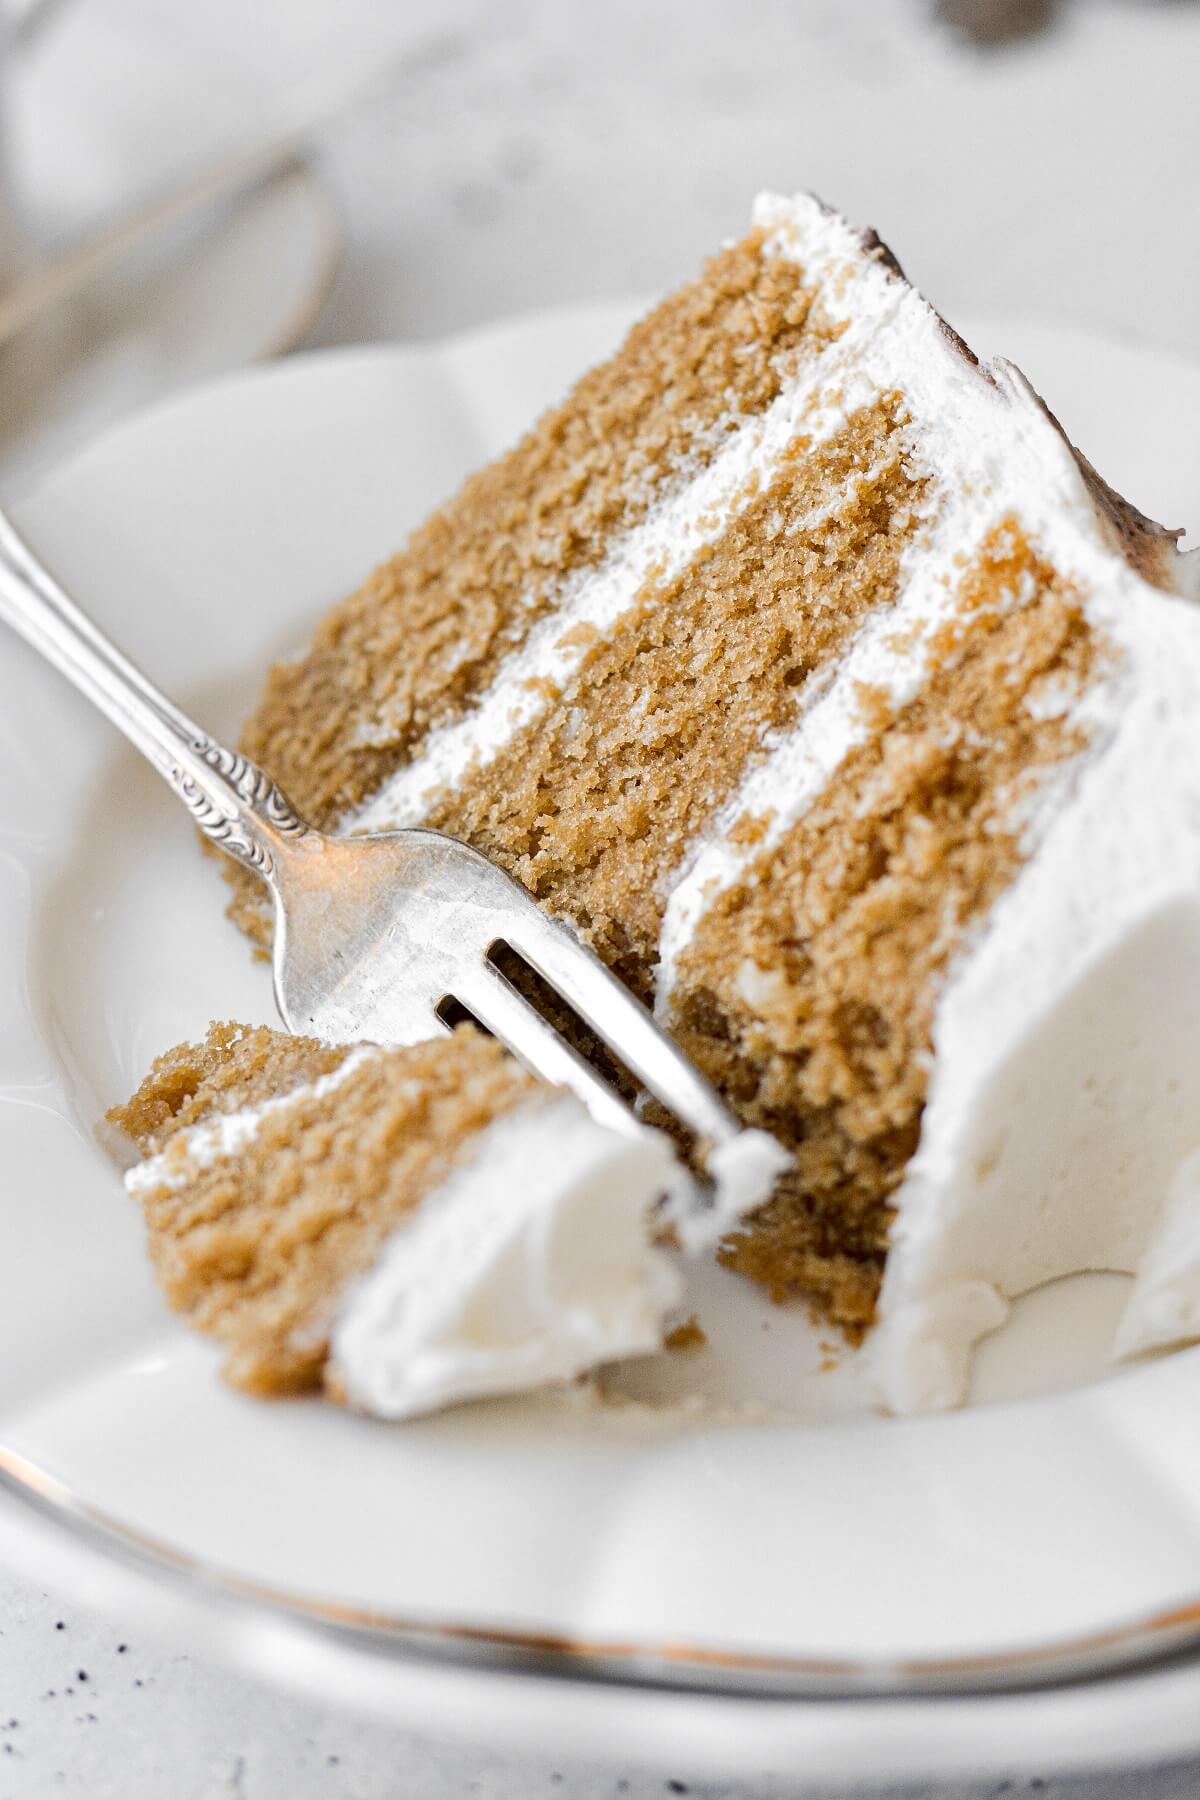 A slice of vanilla latte cake with a bite cut.